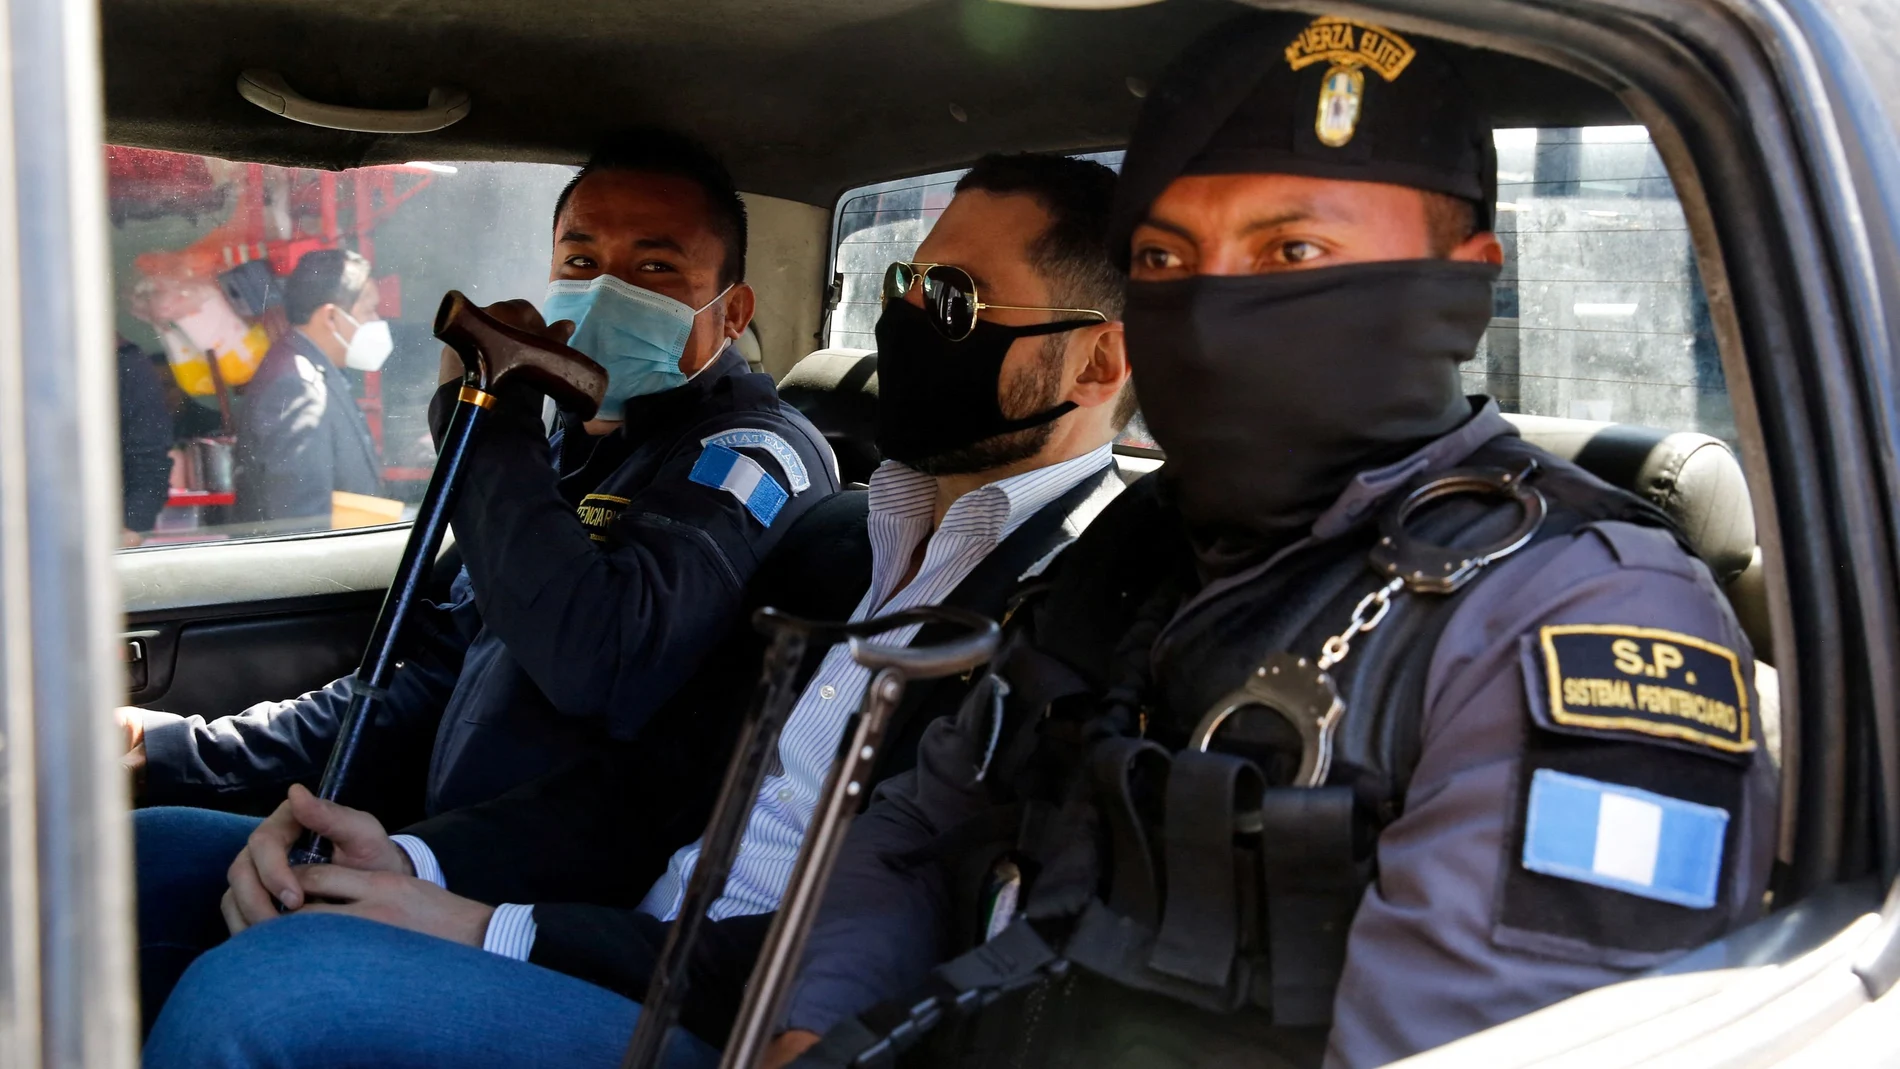 FILE PHOTO: Ricardo Alberto Martinelli, son of former Panamanian President Ricardo Martinelli, sits in a car after a hearing where he accepted extradition to the U.S. on money laundering charges, in Guatemala City, Guatemala, November 8, 2021. REUTERS/Luis Echeverria/File Photo